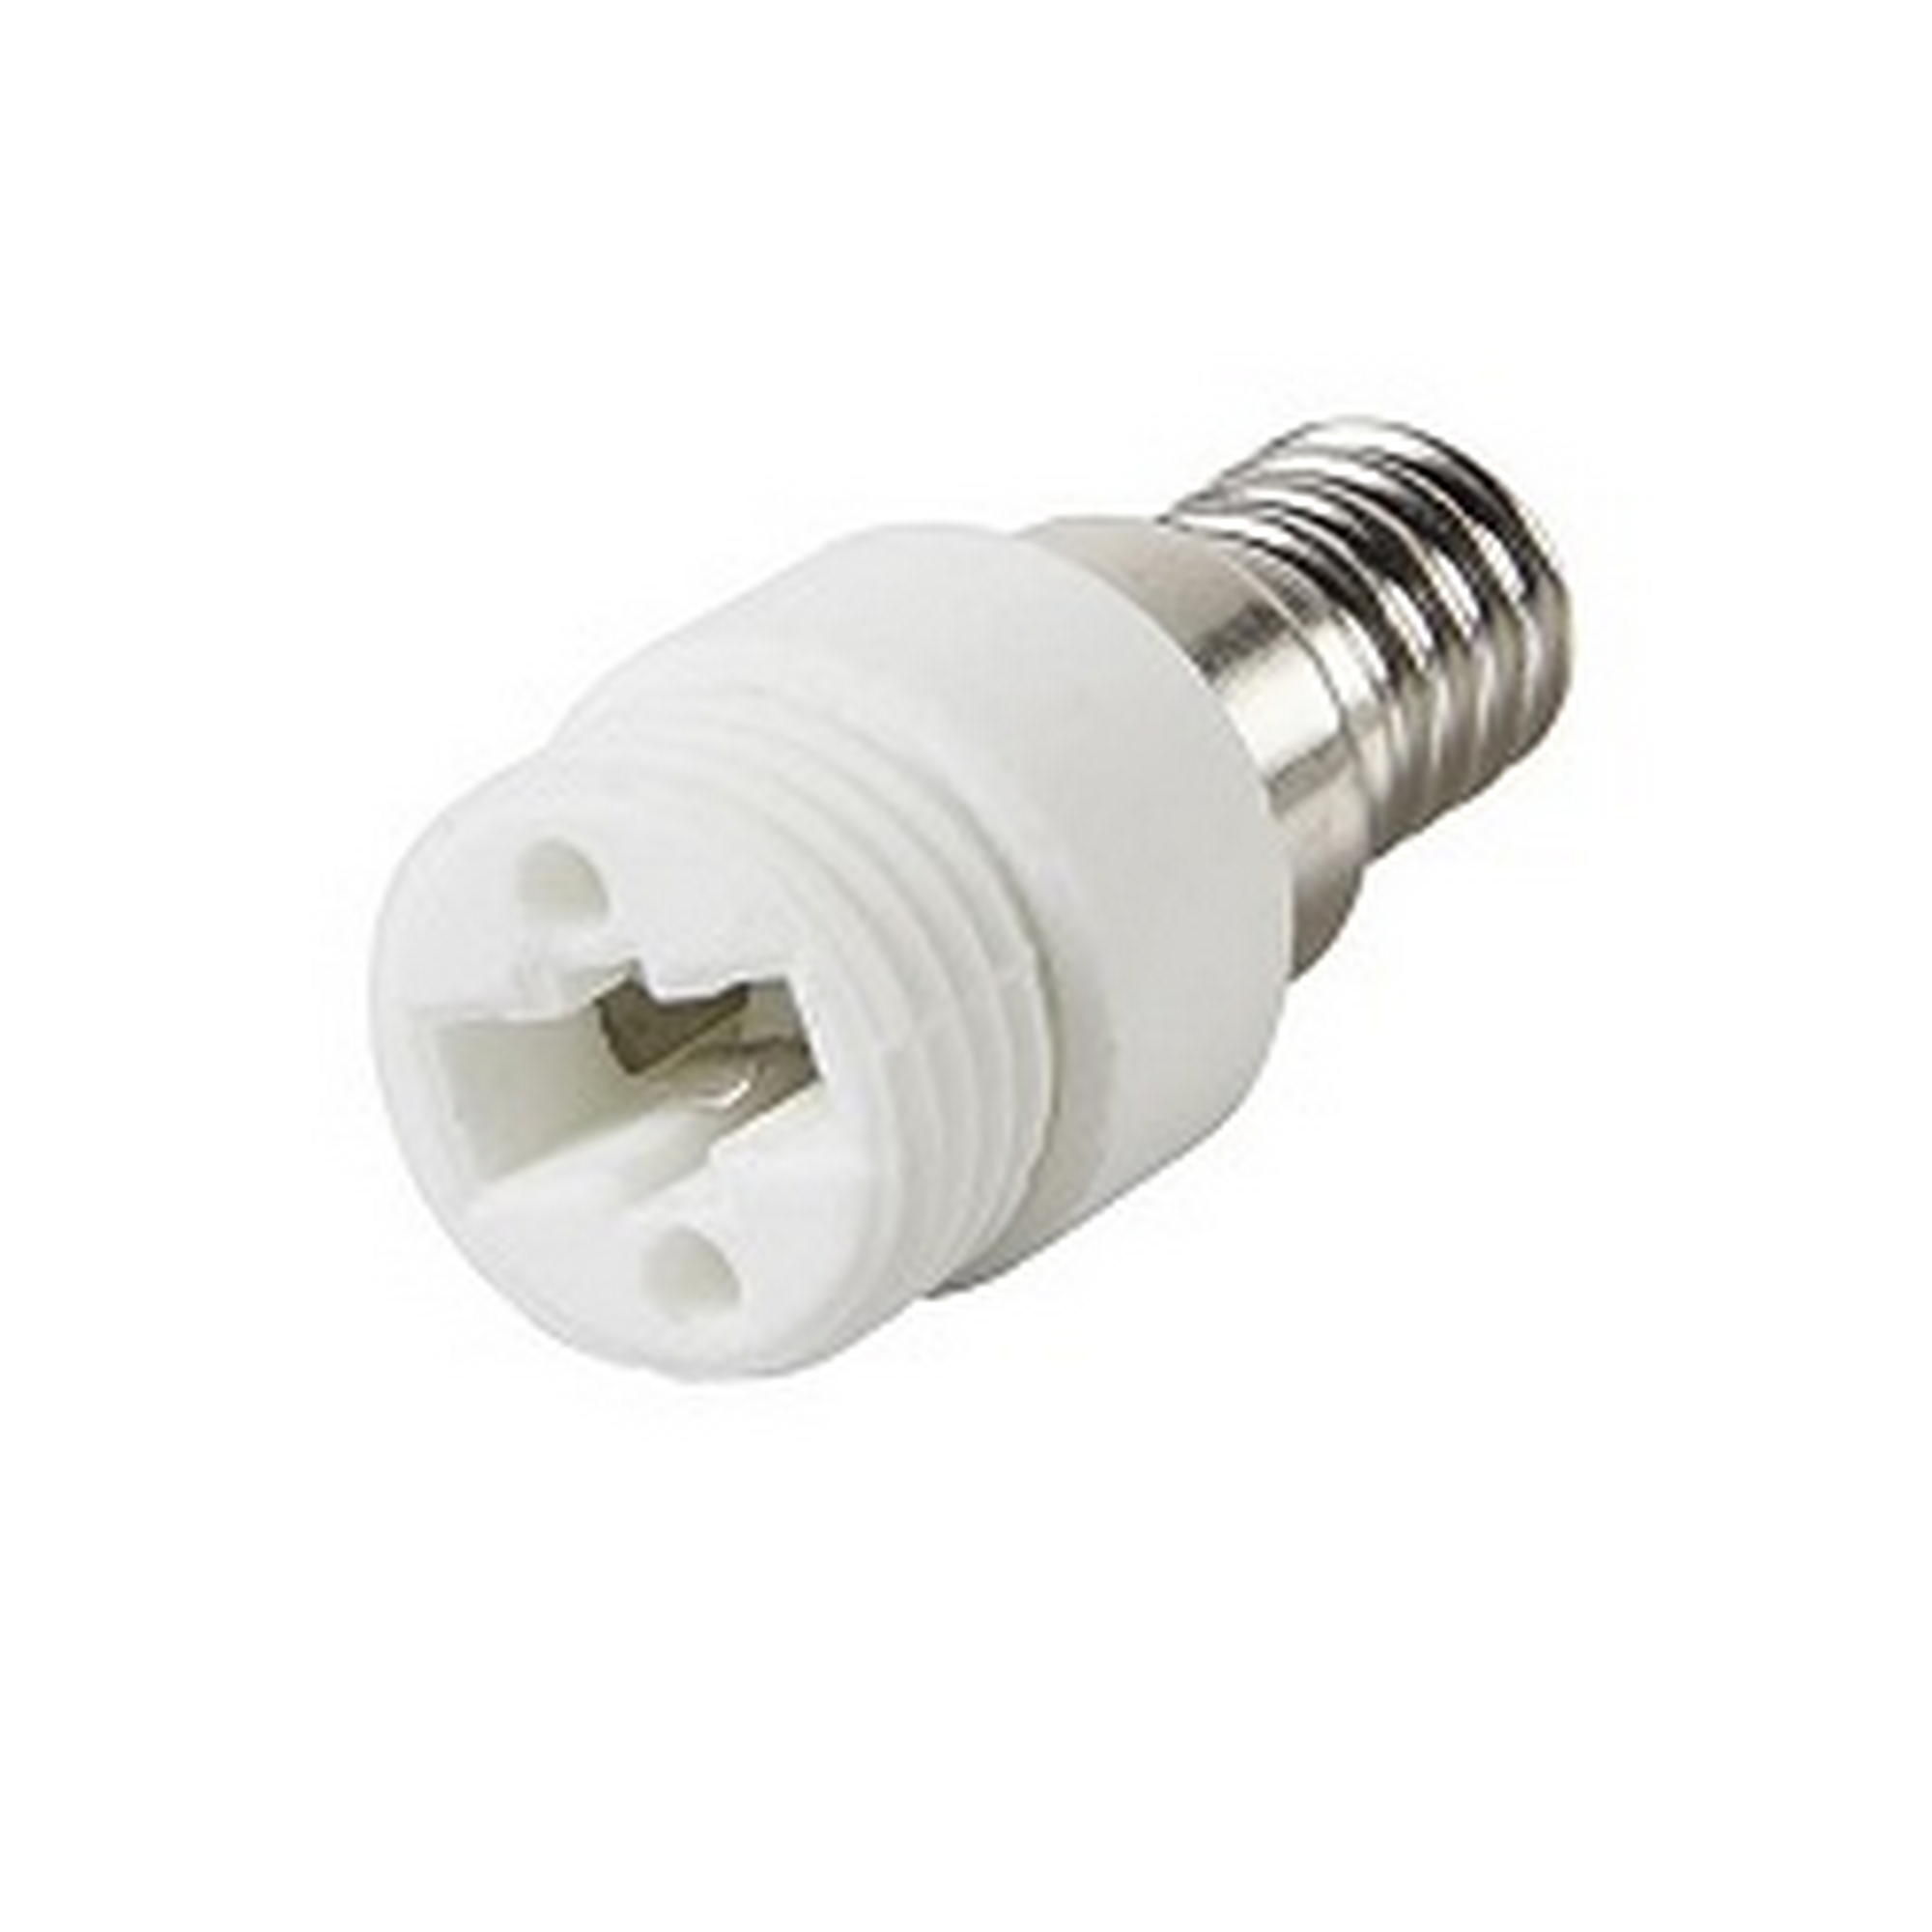 Adapterfassung E14 auf G9, 220 - 240 V, 1 Stück + product picture